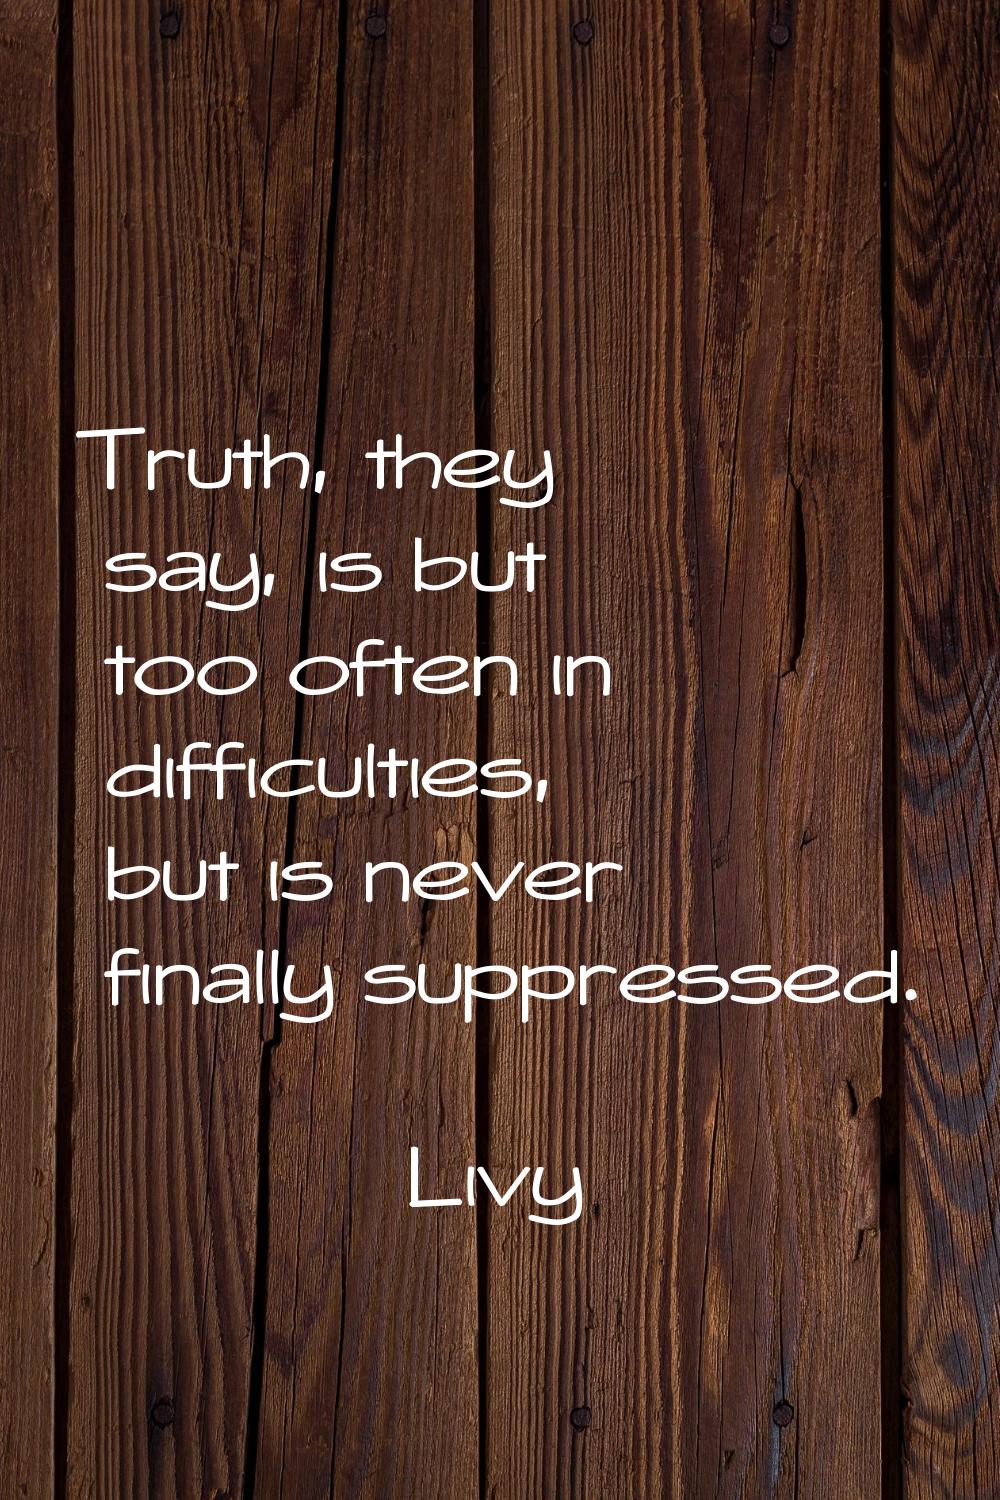 Truth, they say, is but too often in difficulties, but is never finally suppressed.